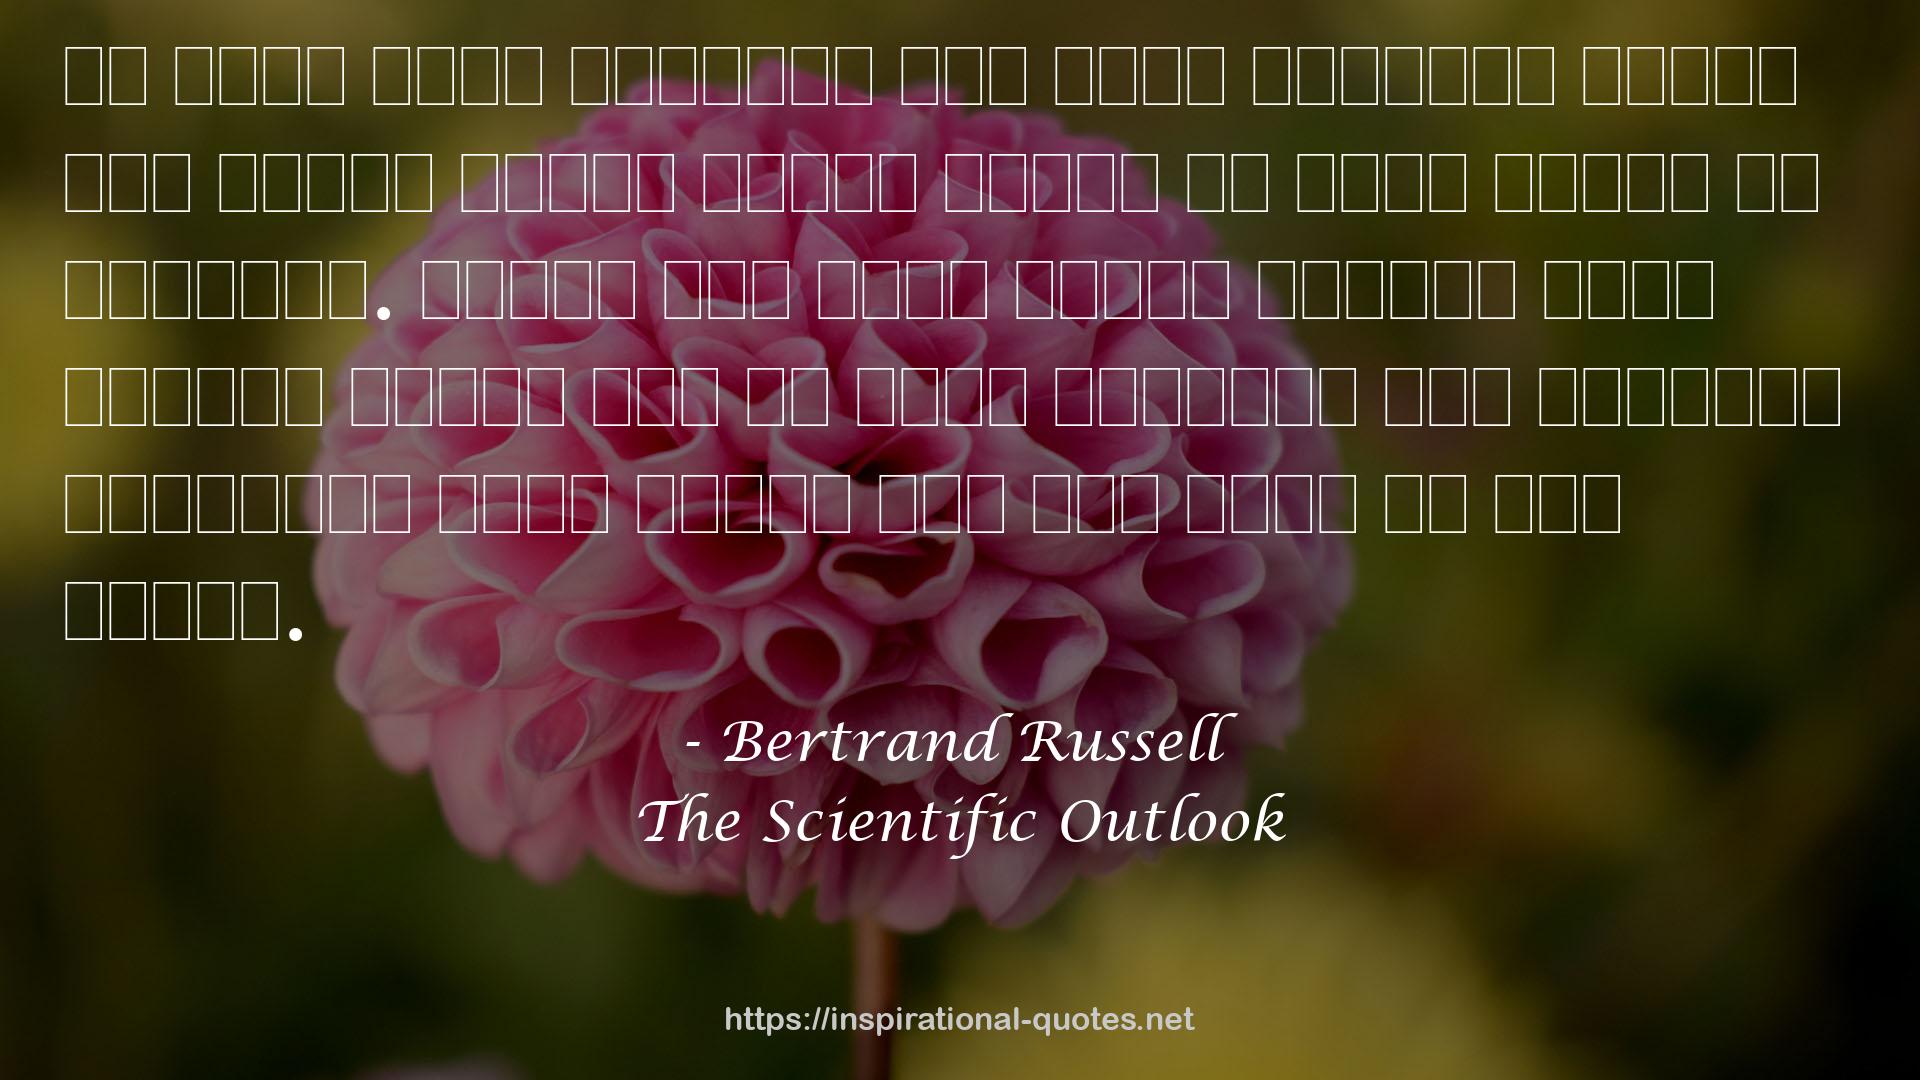 The Scientific Outlook QUOTES